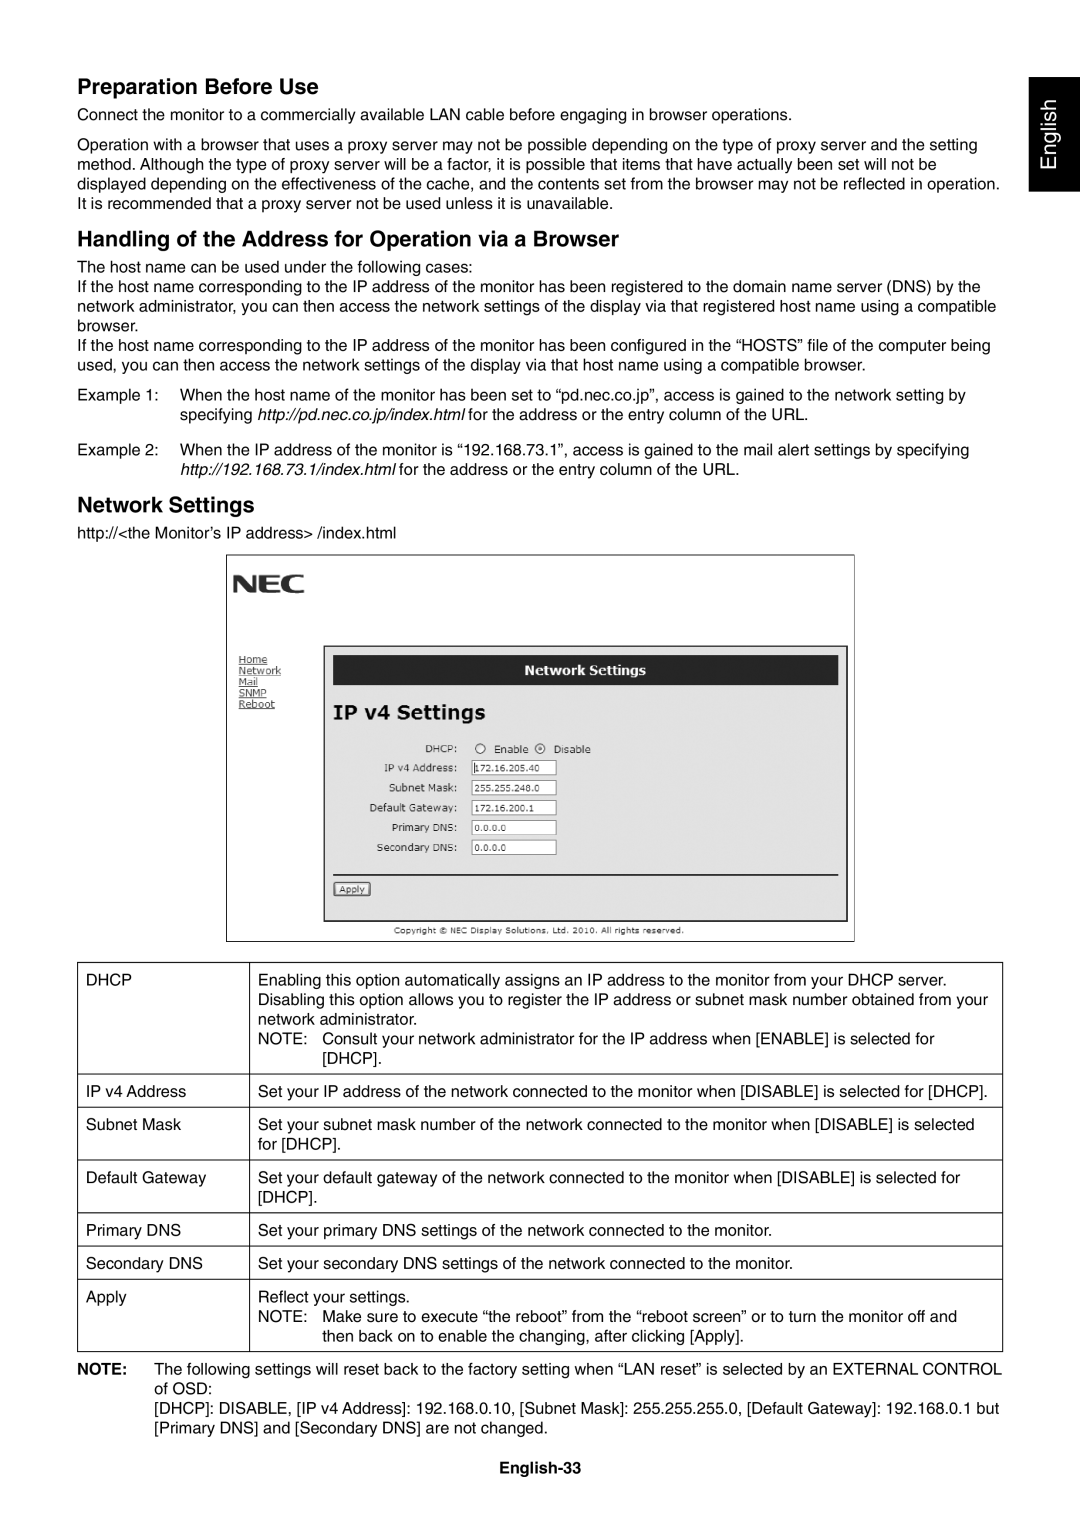 NEC V422, V551 Preparation Before Use, Handling of the Address for Operation via a Browser, Network Settings, English-33 